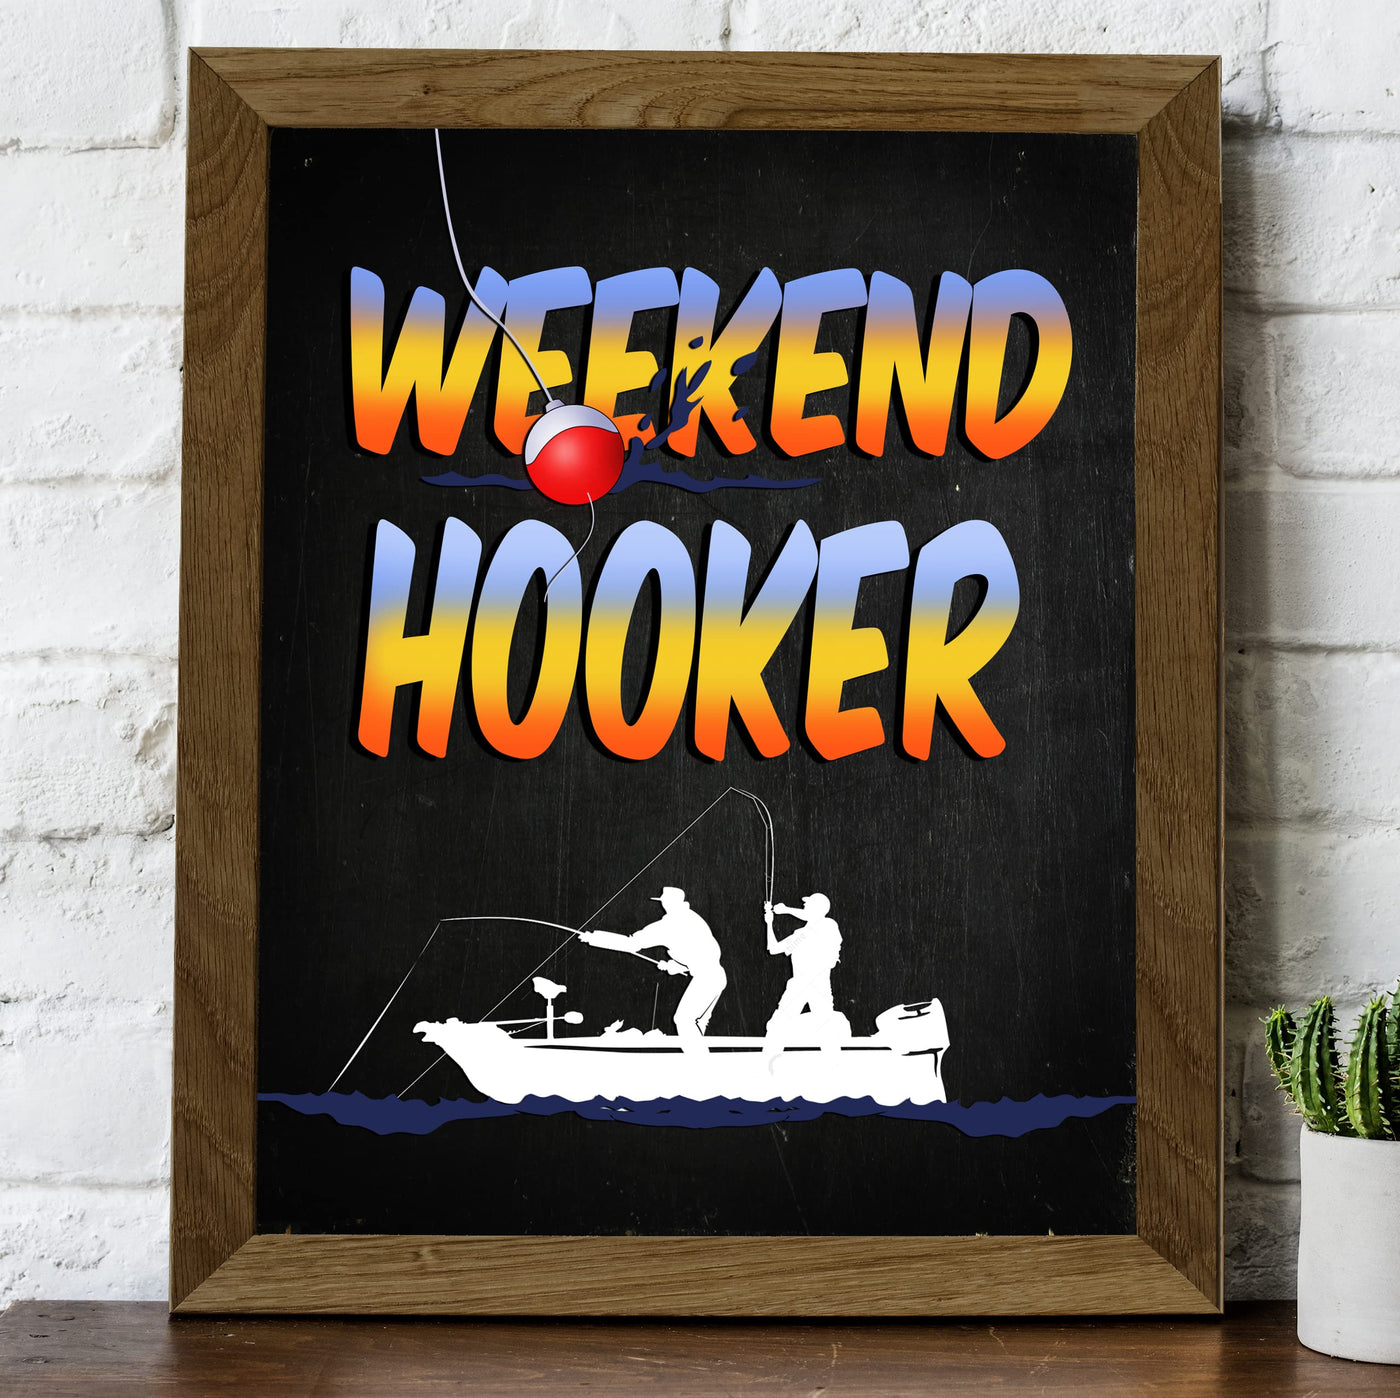 Weekend Hooker-Funny Fishing Wall Art Sign -8 x 10" Rustic Fisherman in Boat Catching Fish Print -Ready to Frame. Home-Cabin-Lodge-Lake House Decor. Great Retro Gift for Dad and All Fishermen!